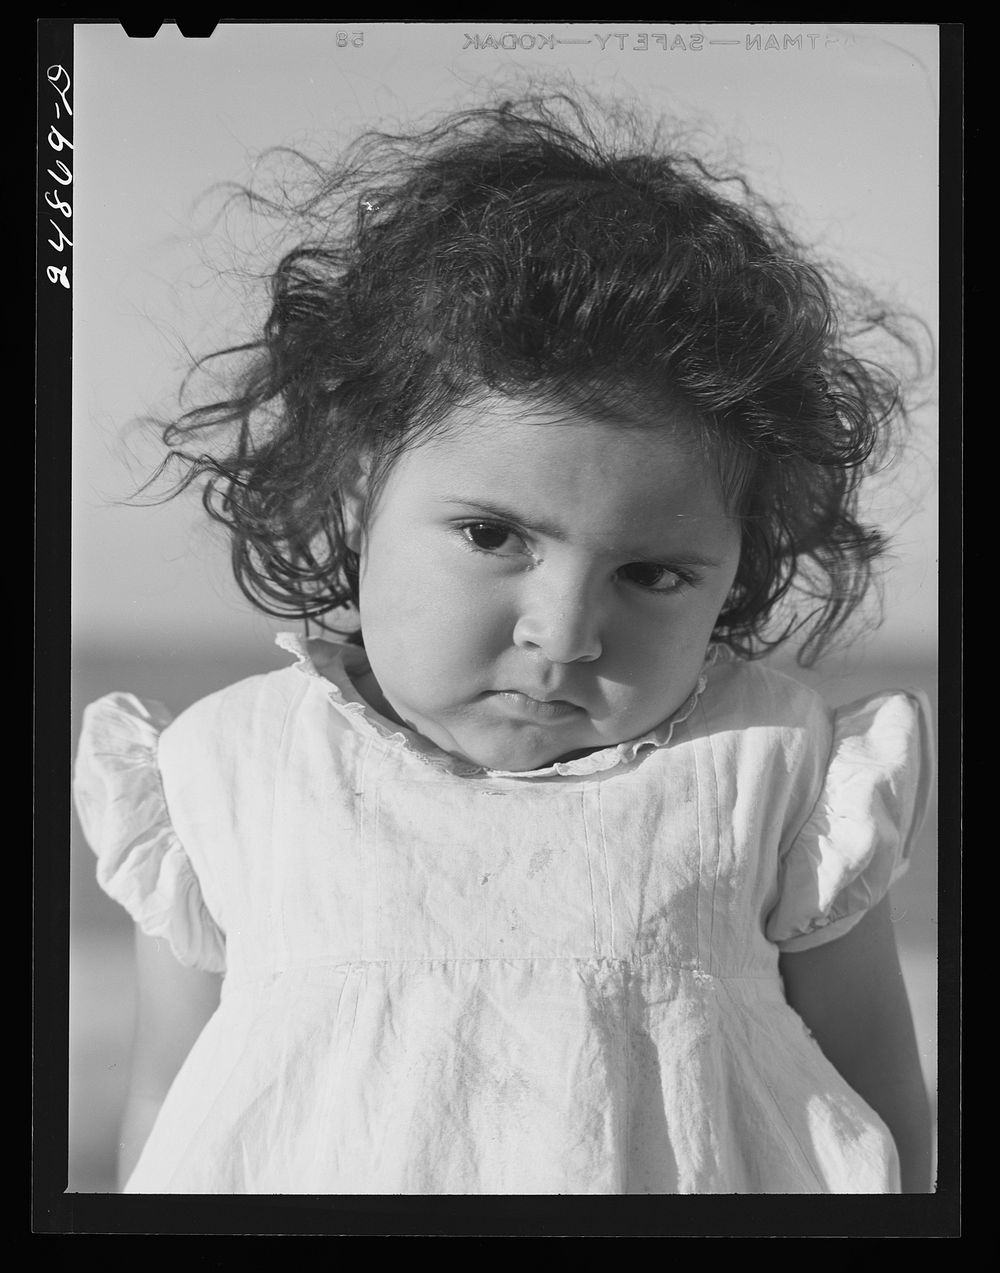 Migratory worker's child. Robstown camp, Texas. Sourced from the Library of Congress.